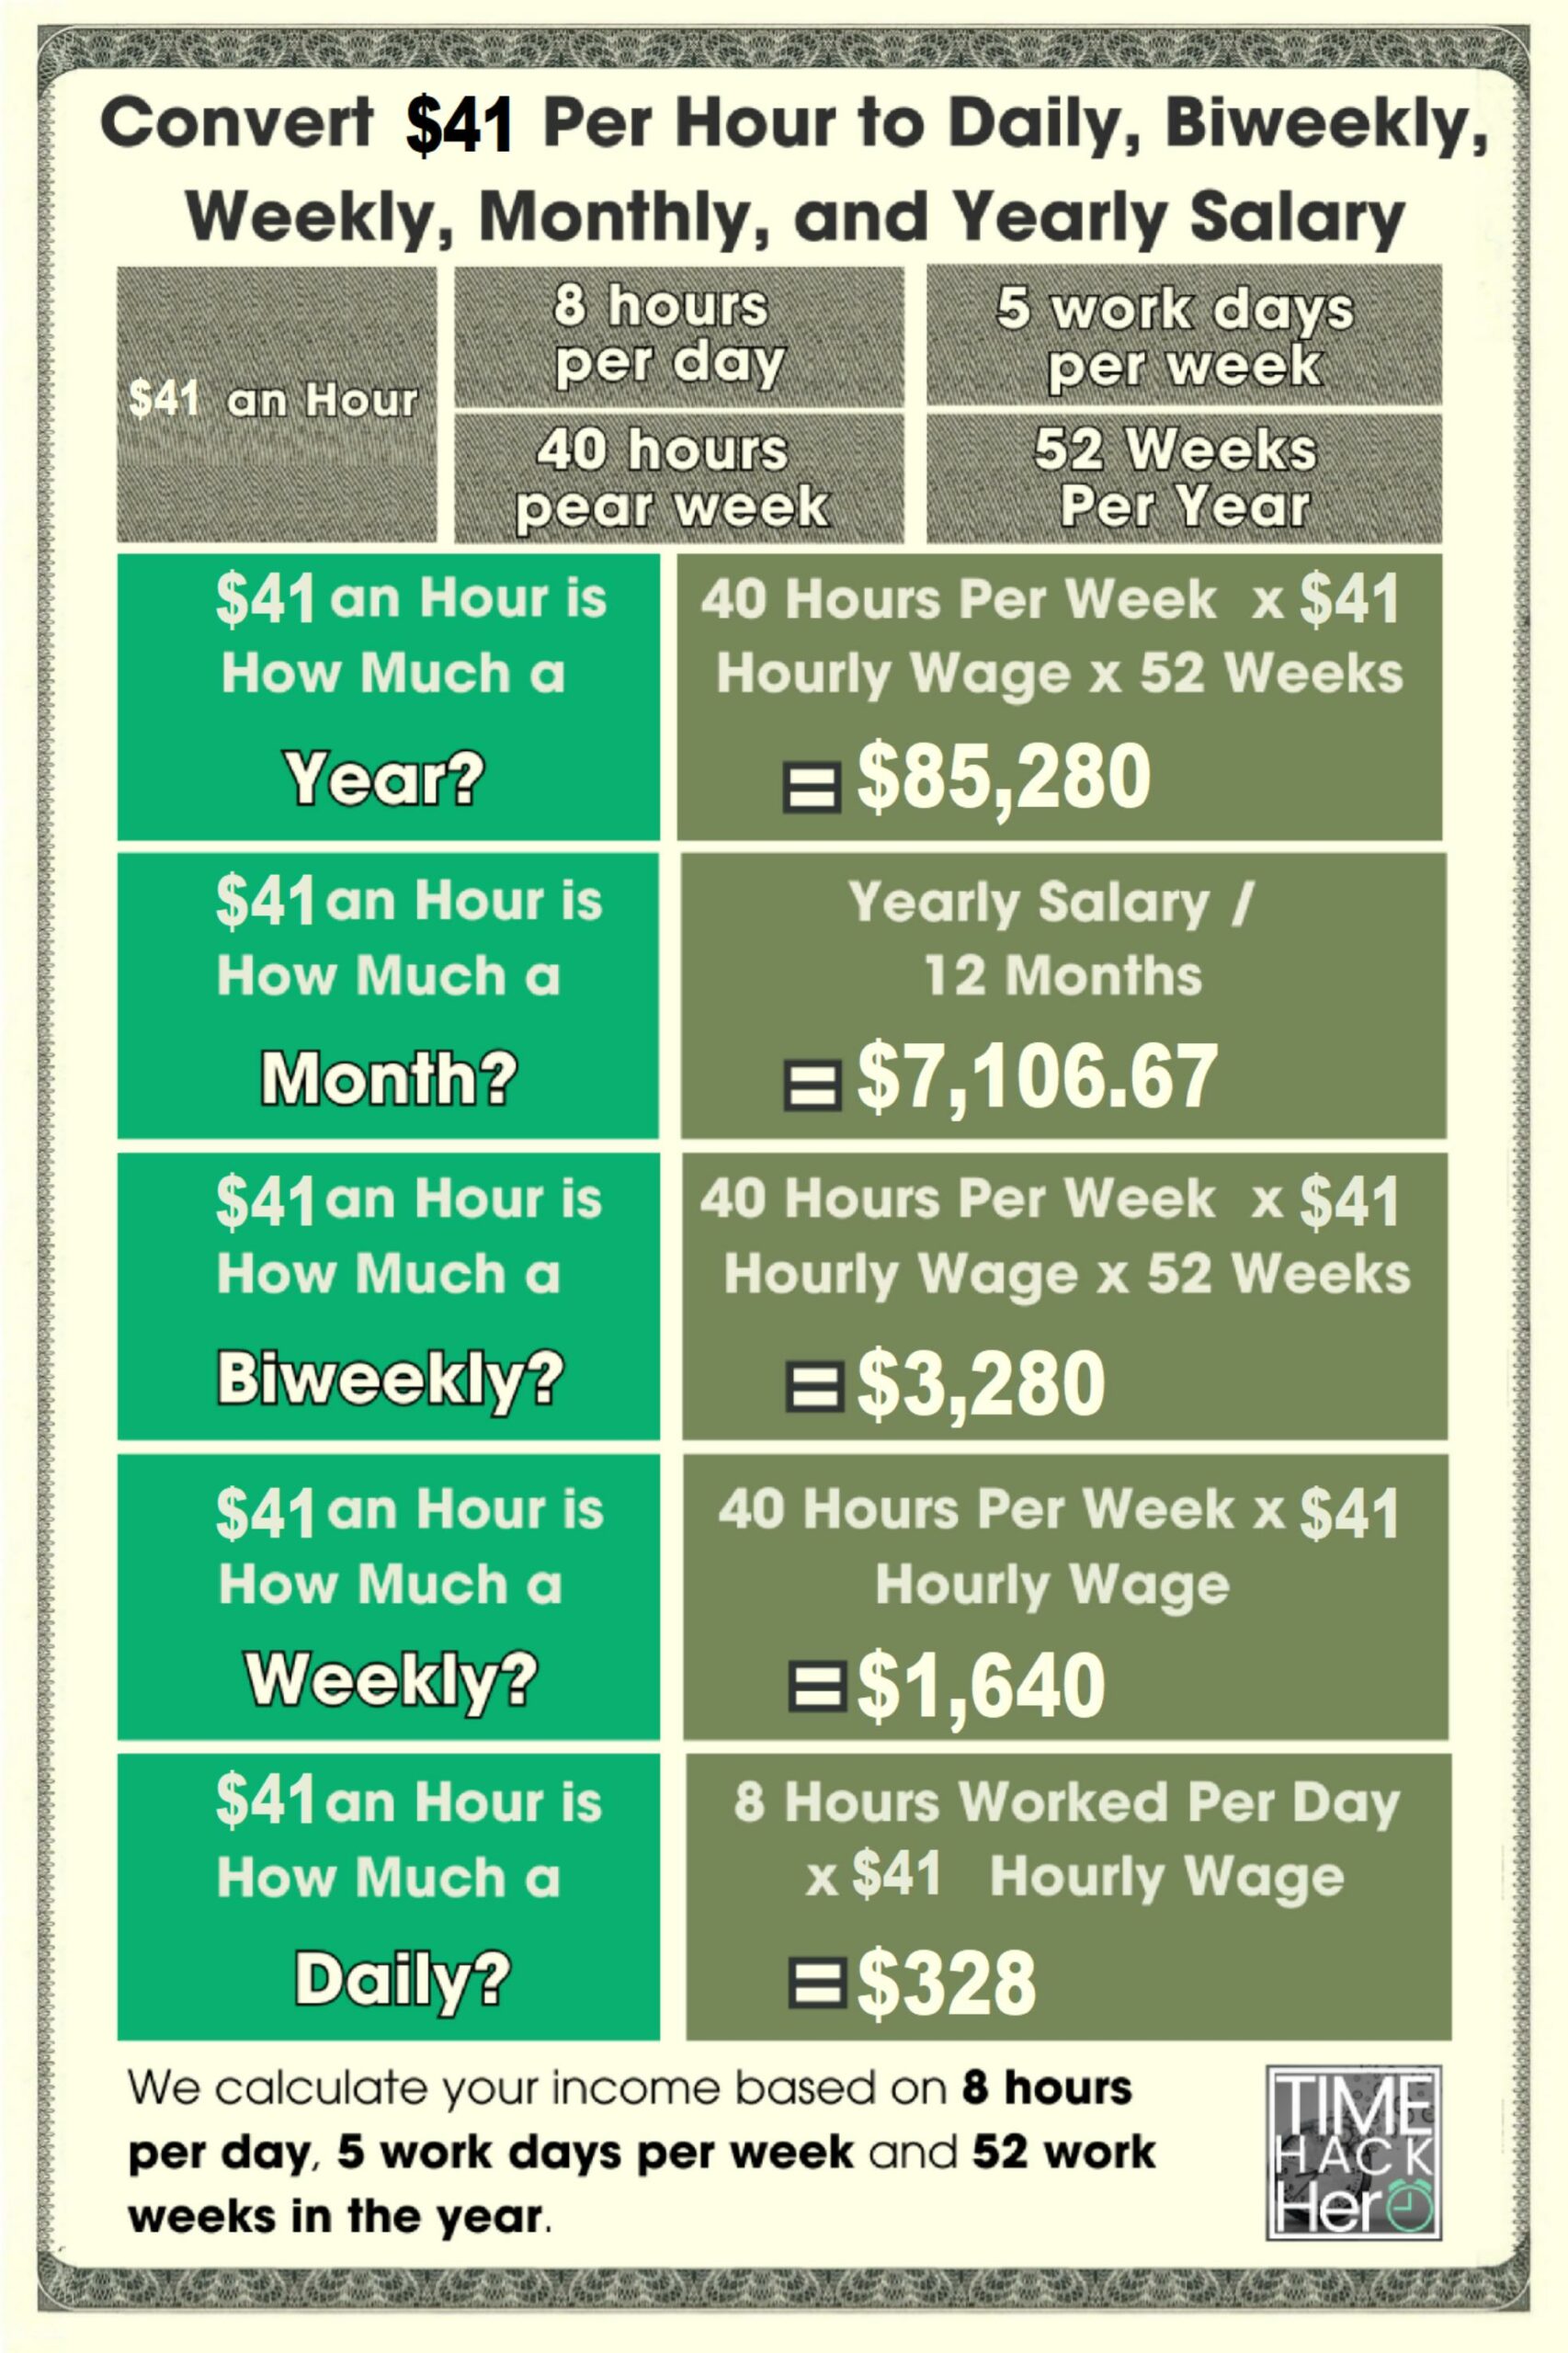 Convert $41 Per Hour to Weekly, Monthly, and Yearly Salary